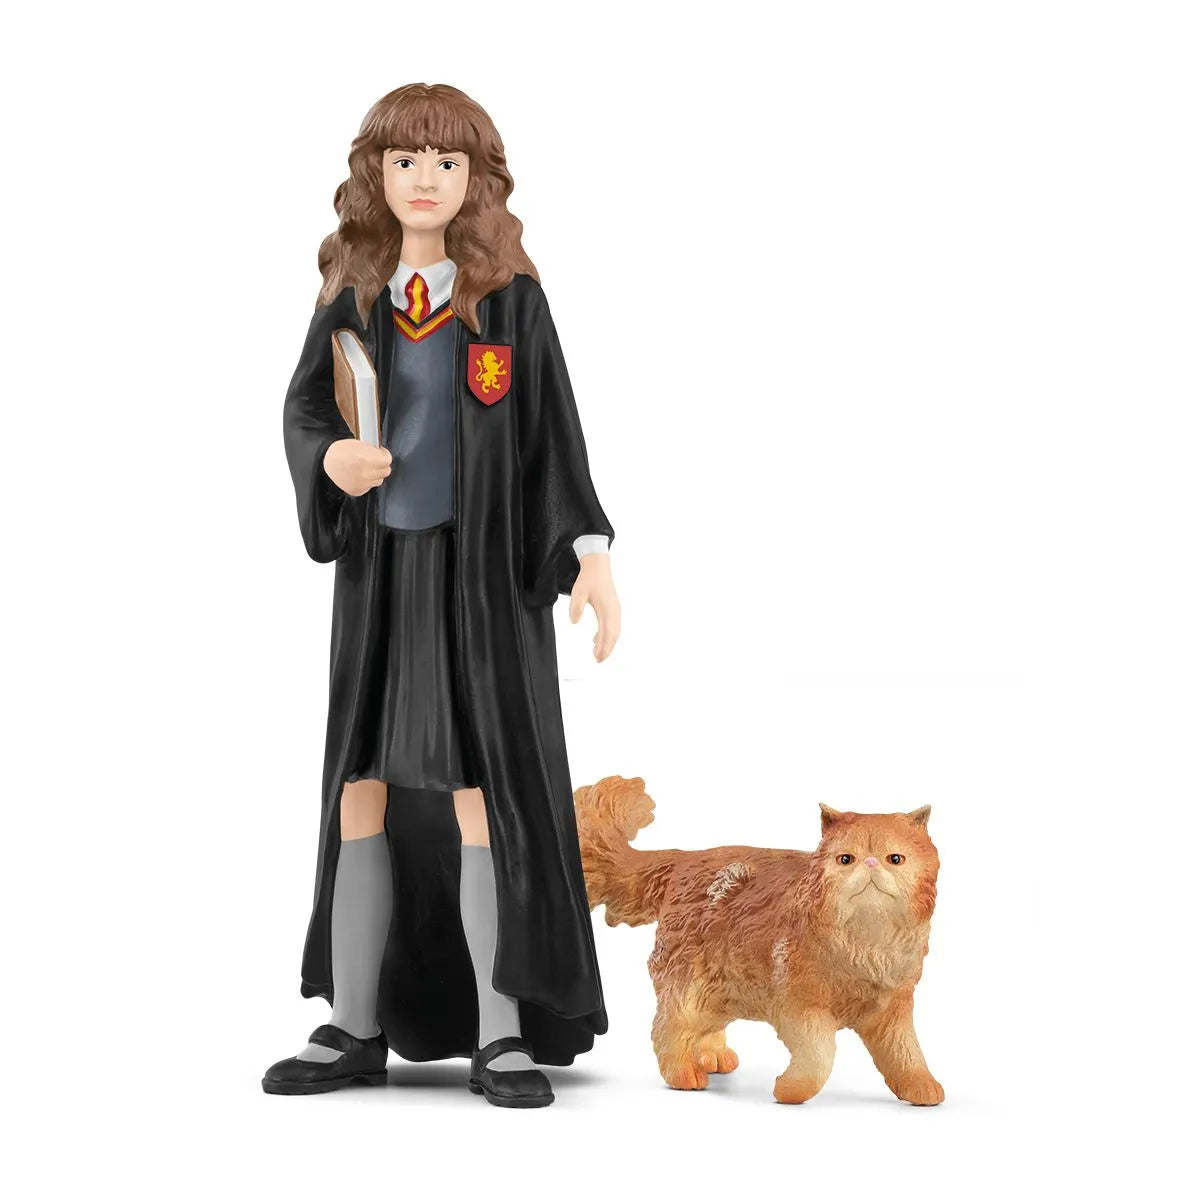 PLAYMOBIL HARRY POTTER CUSTOMIZED FIGURES W/ RON, HERMIONE AND HEDWIG,  ANIMALS